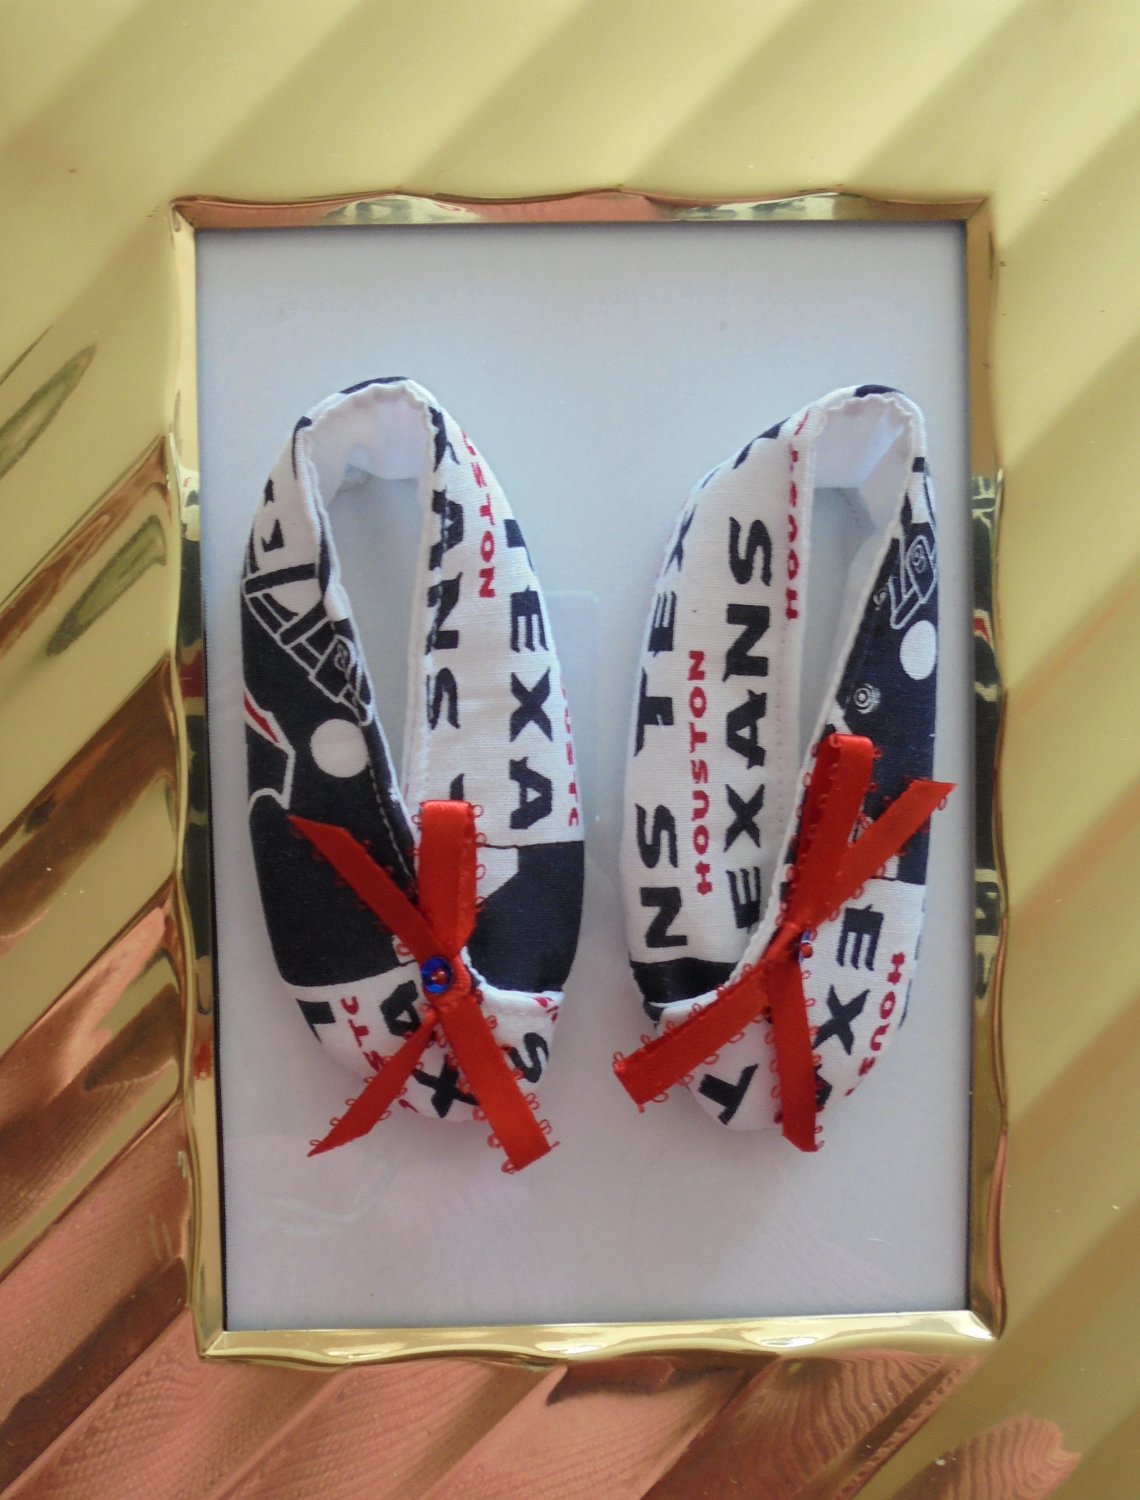 Baby Shoes 3-6 Mo. Girls - Handmade NFL Houston Texans Booties w/Sequin and Beading